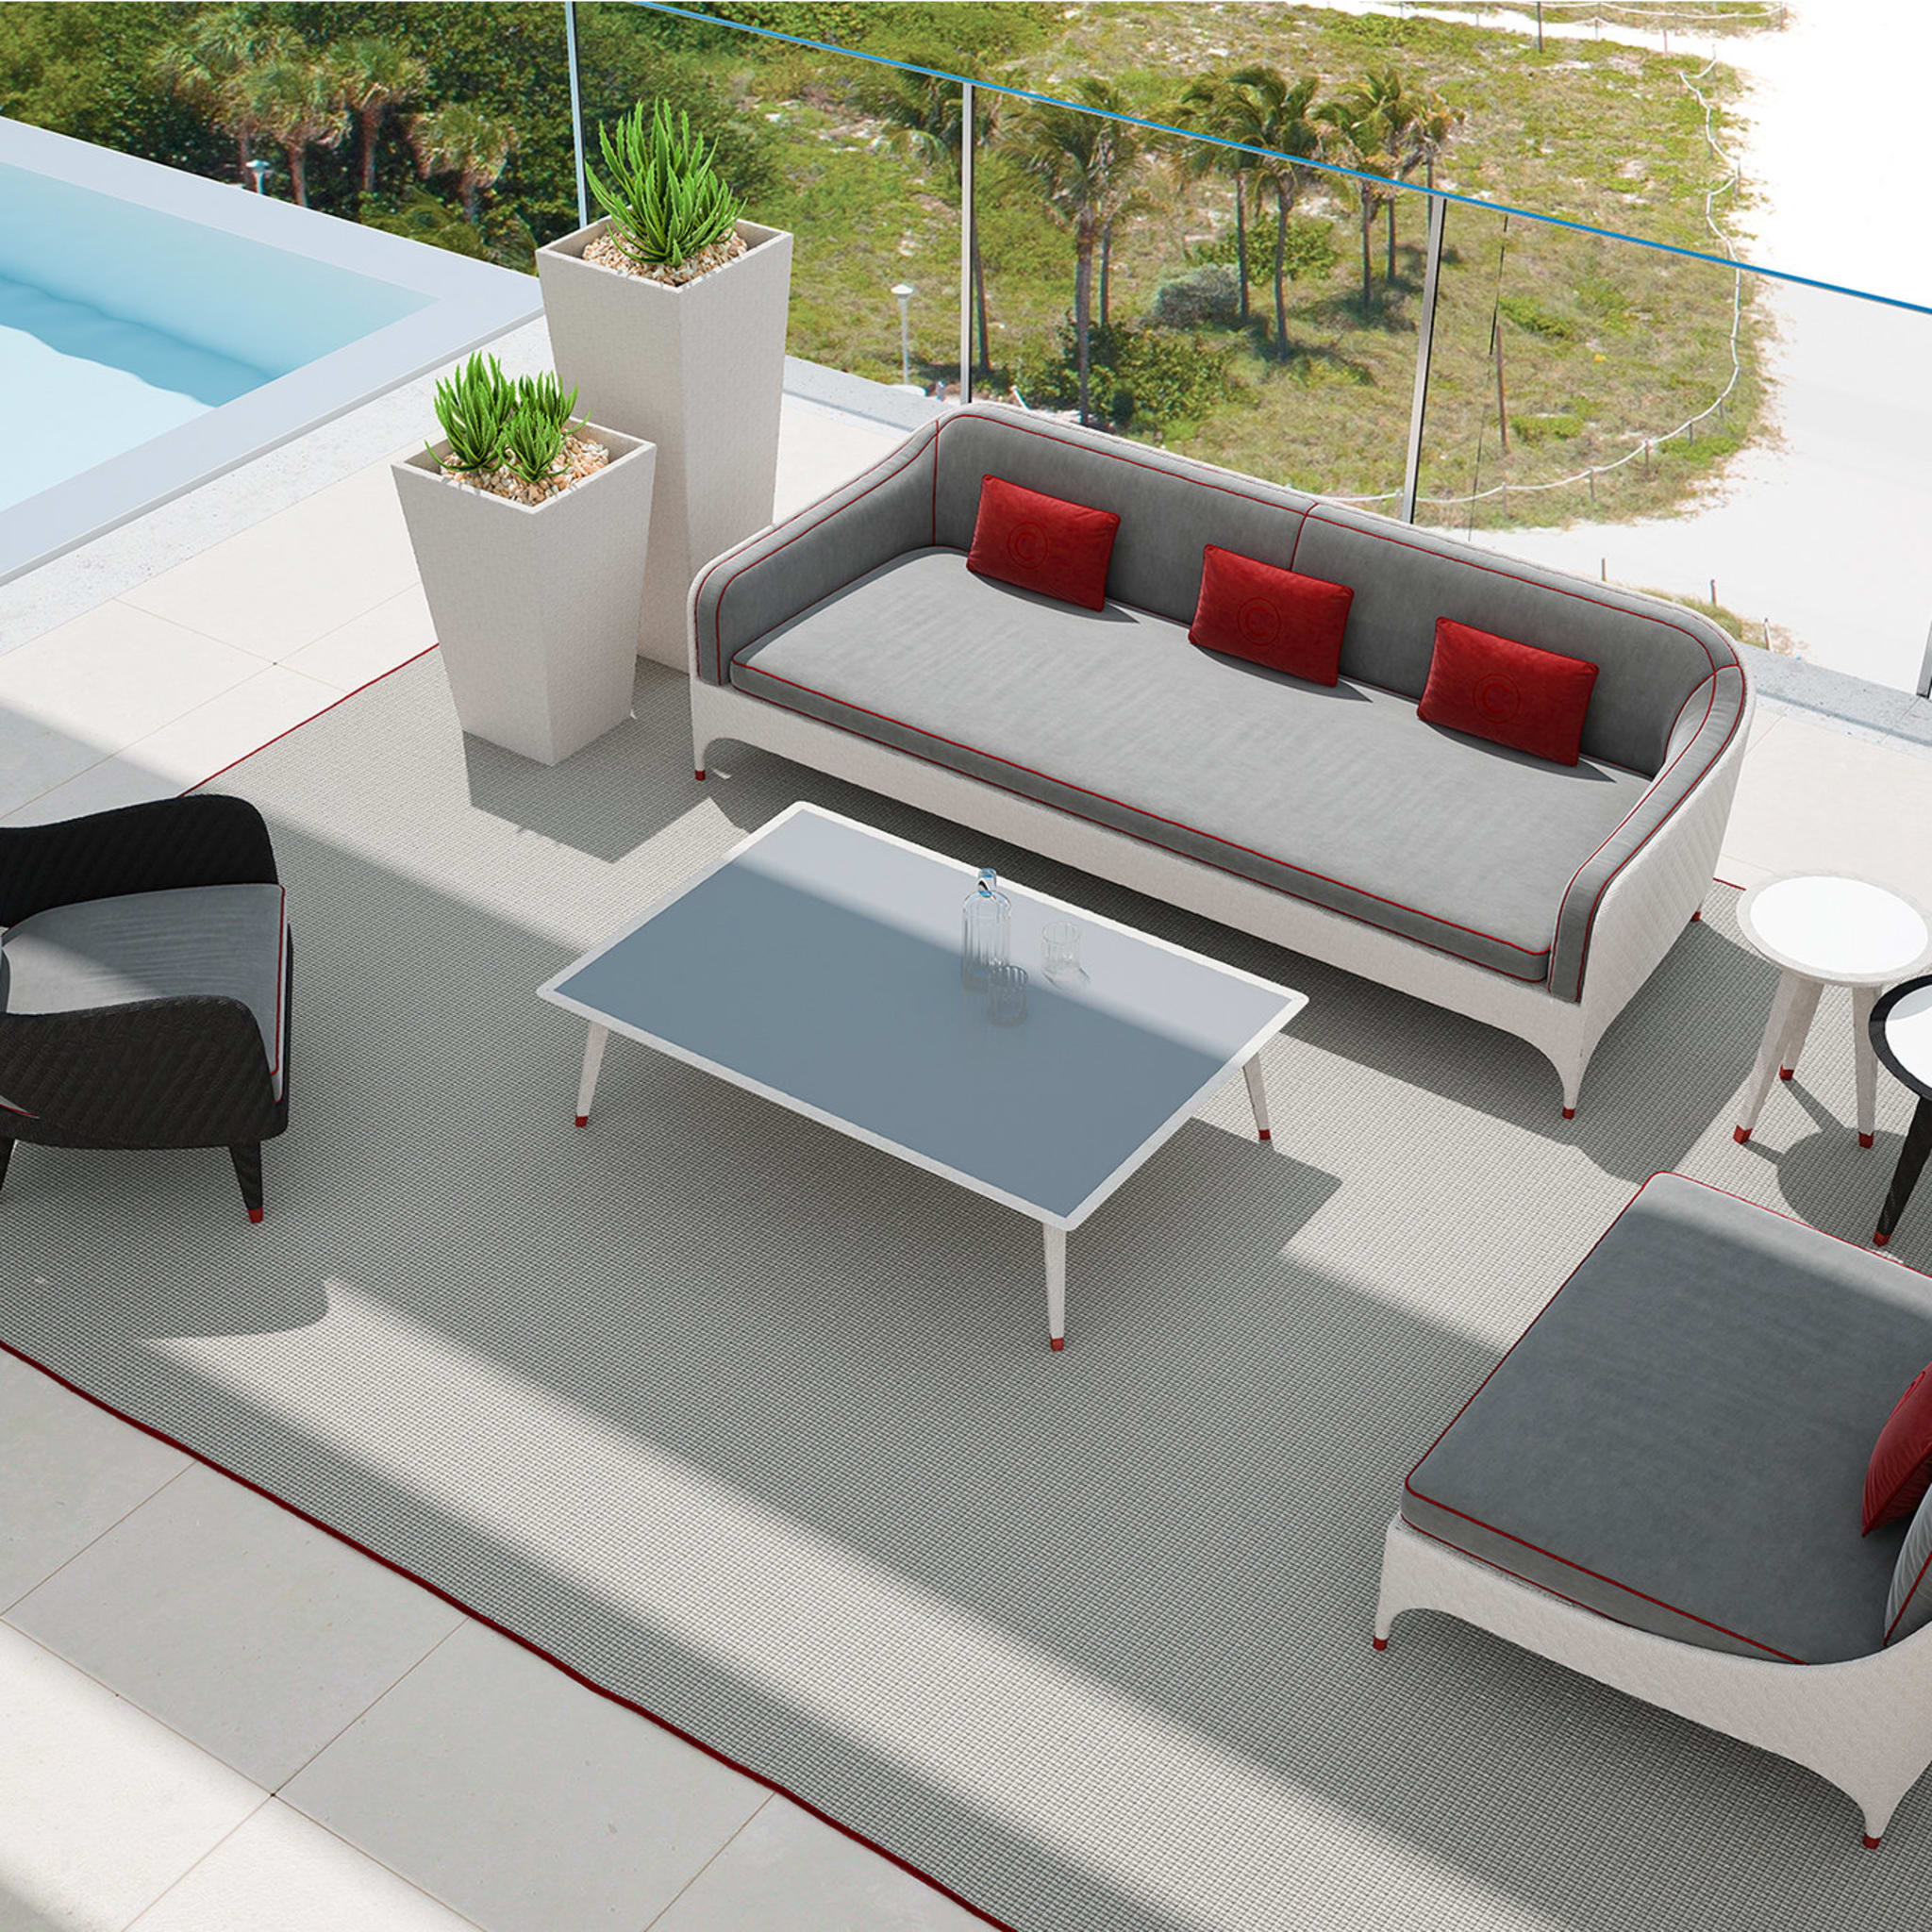 Black 3-Seater Sofa with Gray and Red Cushions - Alternative view 2